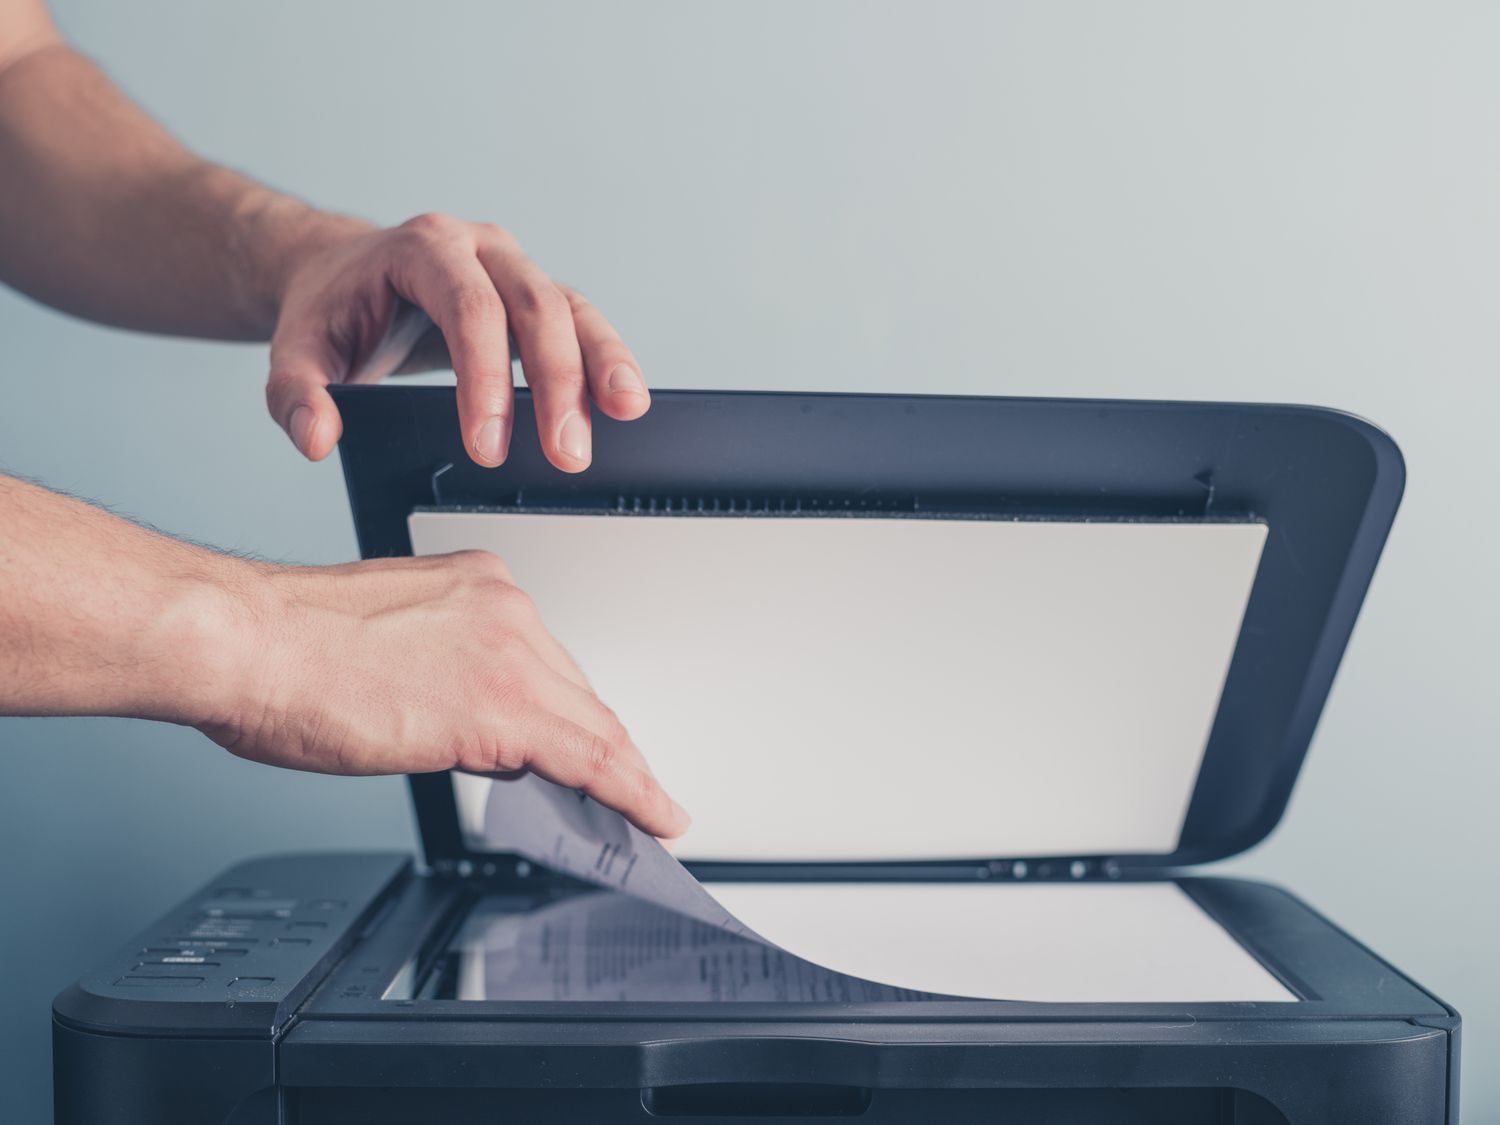 how to scan a document on a printer?